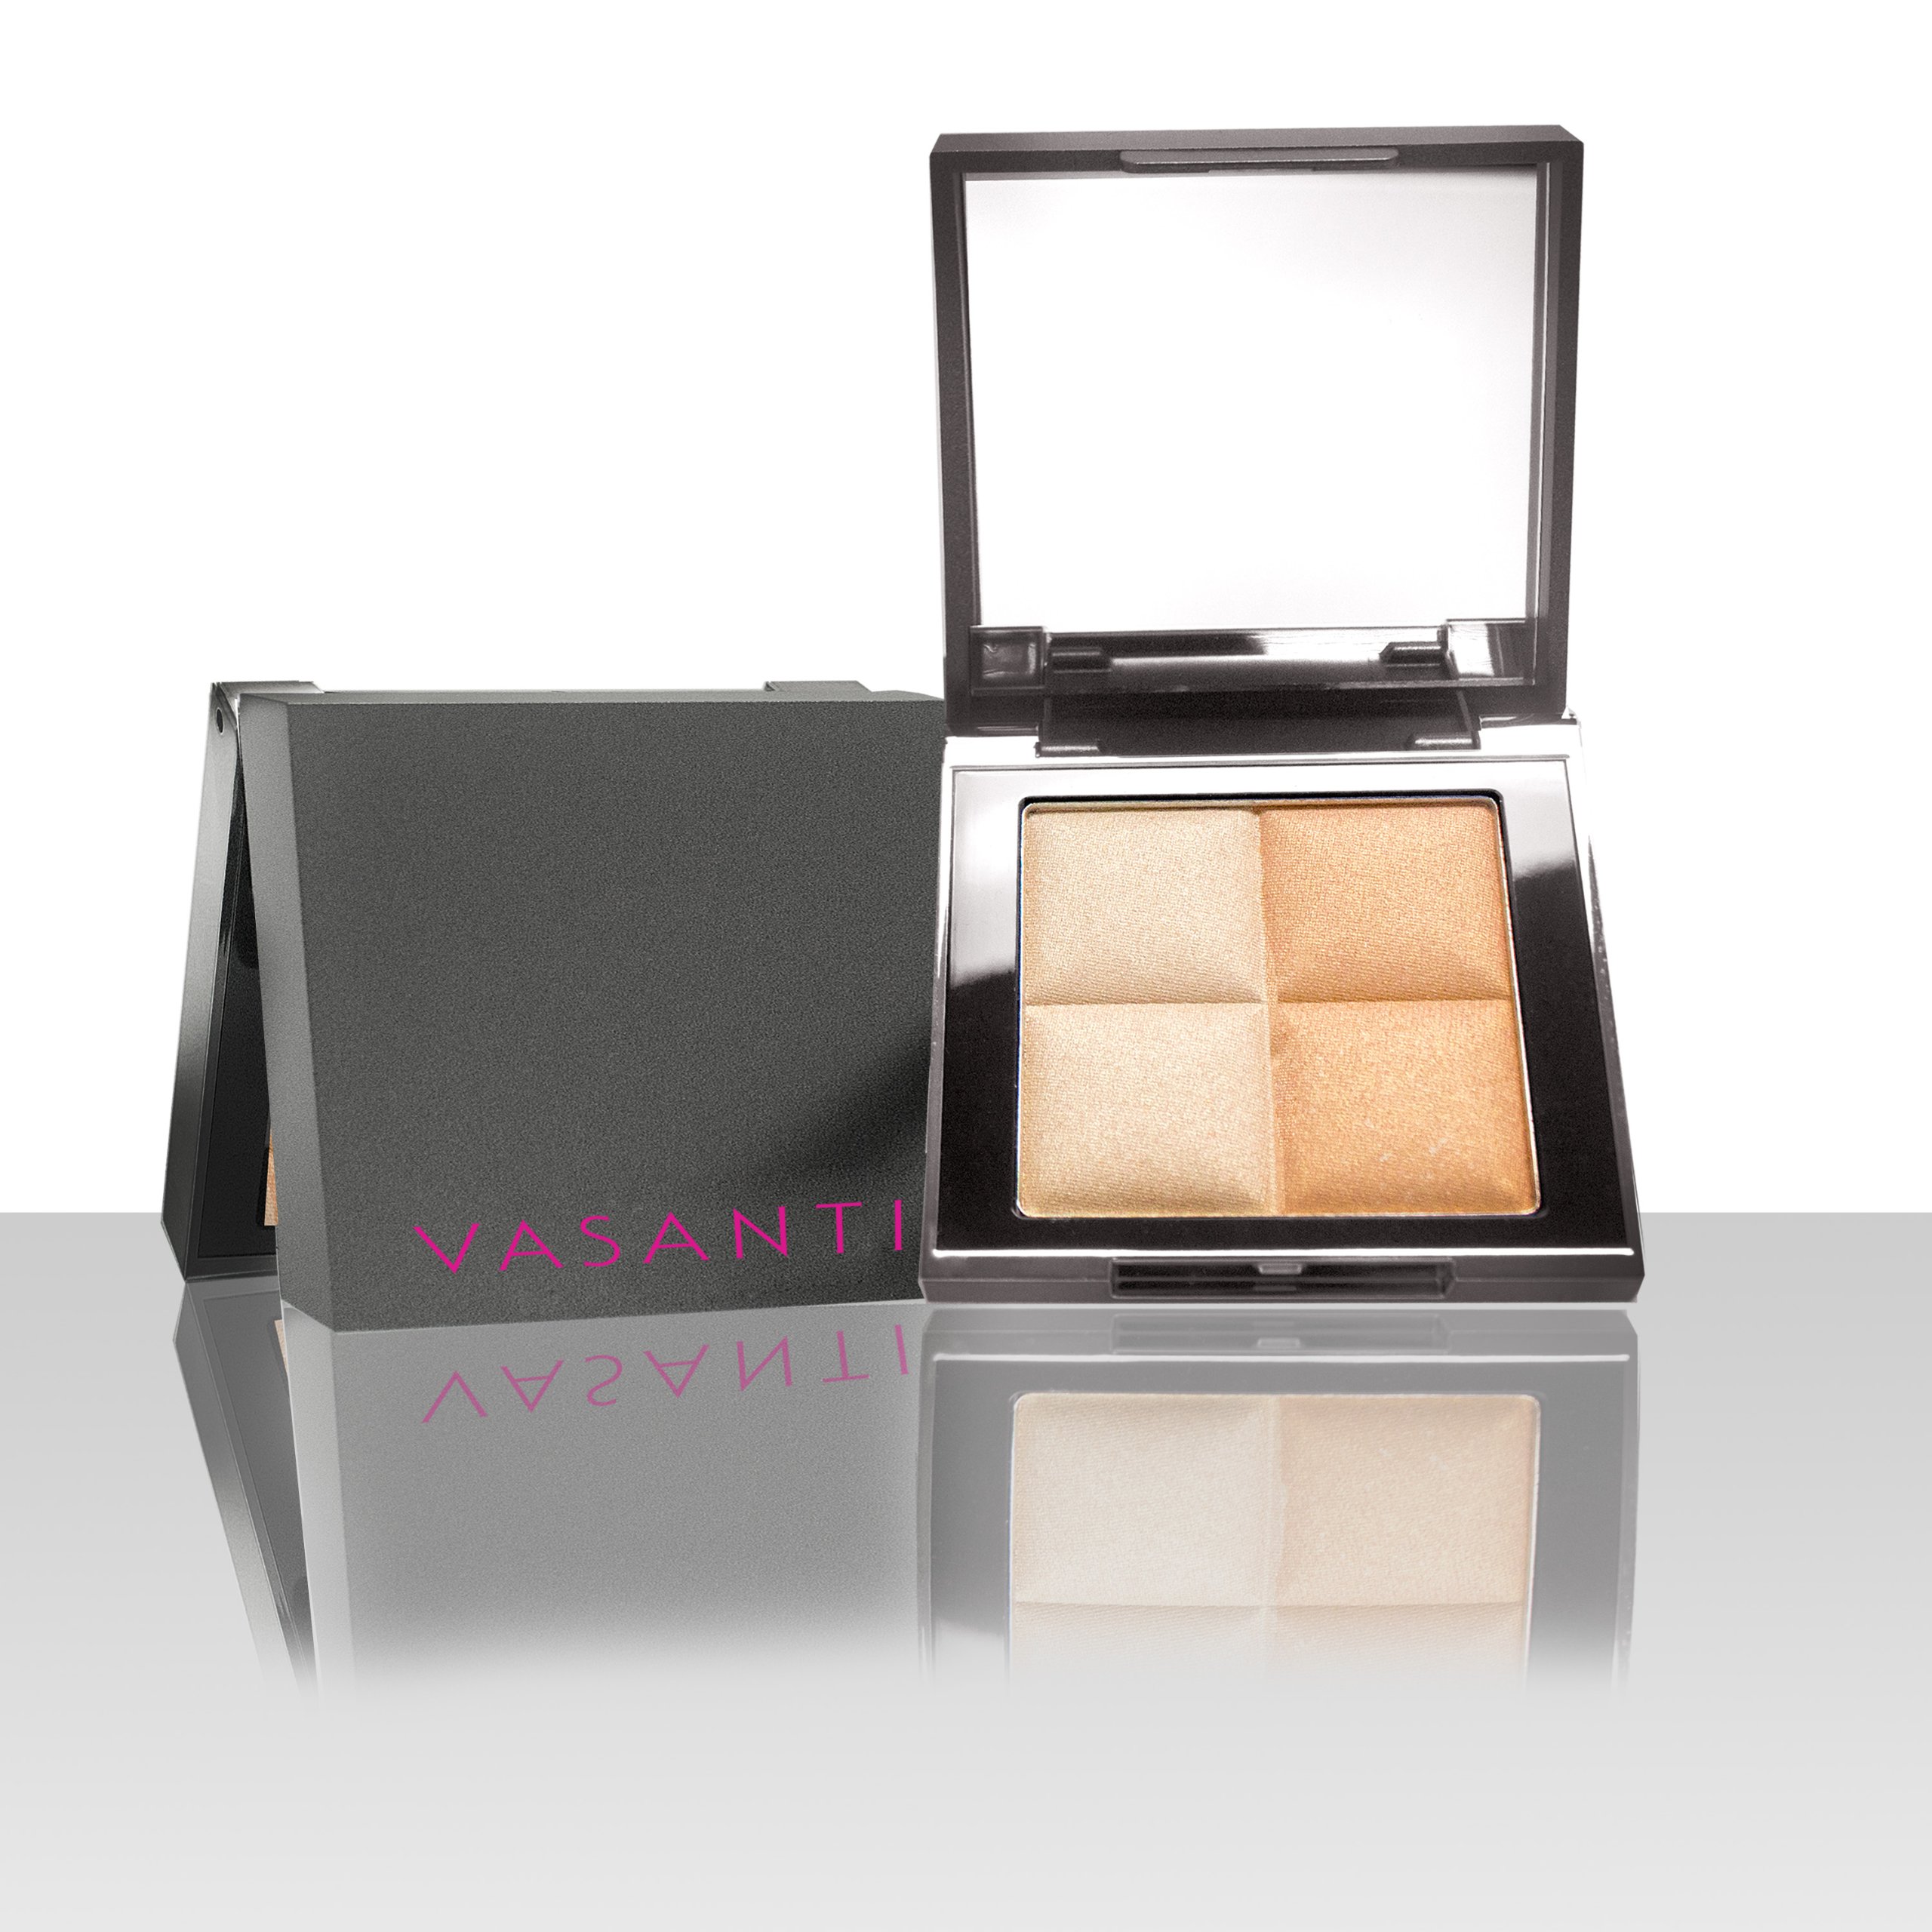 VASANTI See the light Highlighter Duo in Golden Child - Highlighter for Face and Eyes - Paraben Free